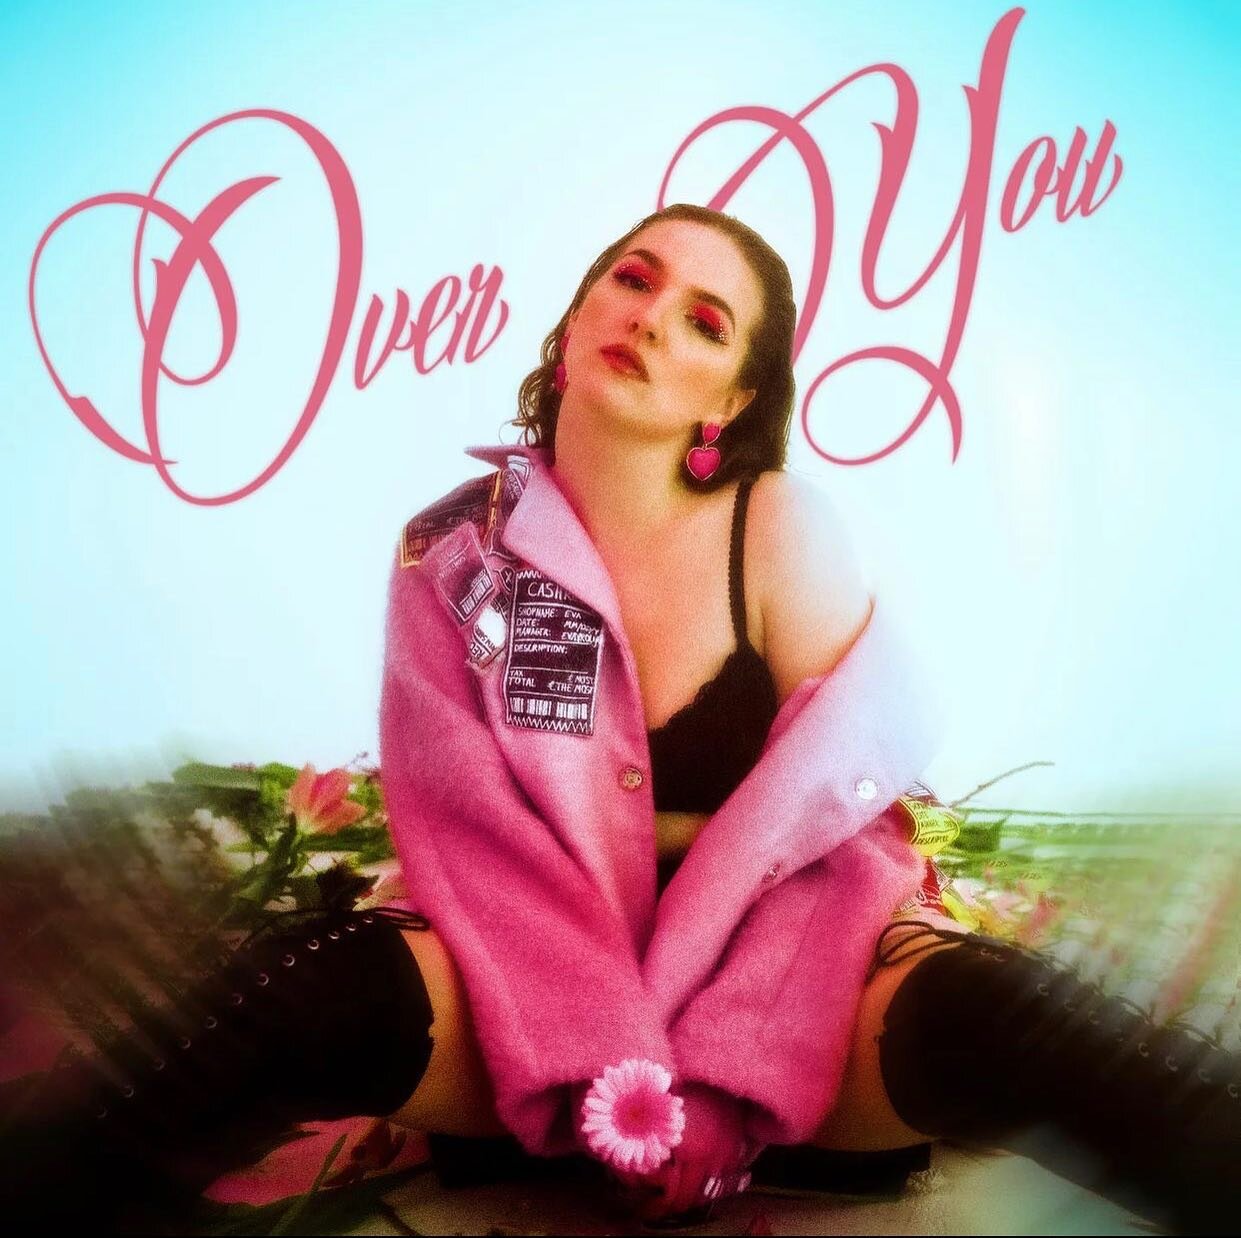 Over You by the epic @daimylotus out. Written with her and @narayan_music my new best friends. (some additional prod &amp; guitar by me as well). We&rsquo;re gonna do more stuff too. Stoked!